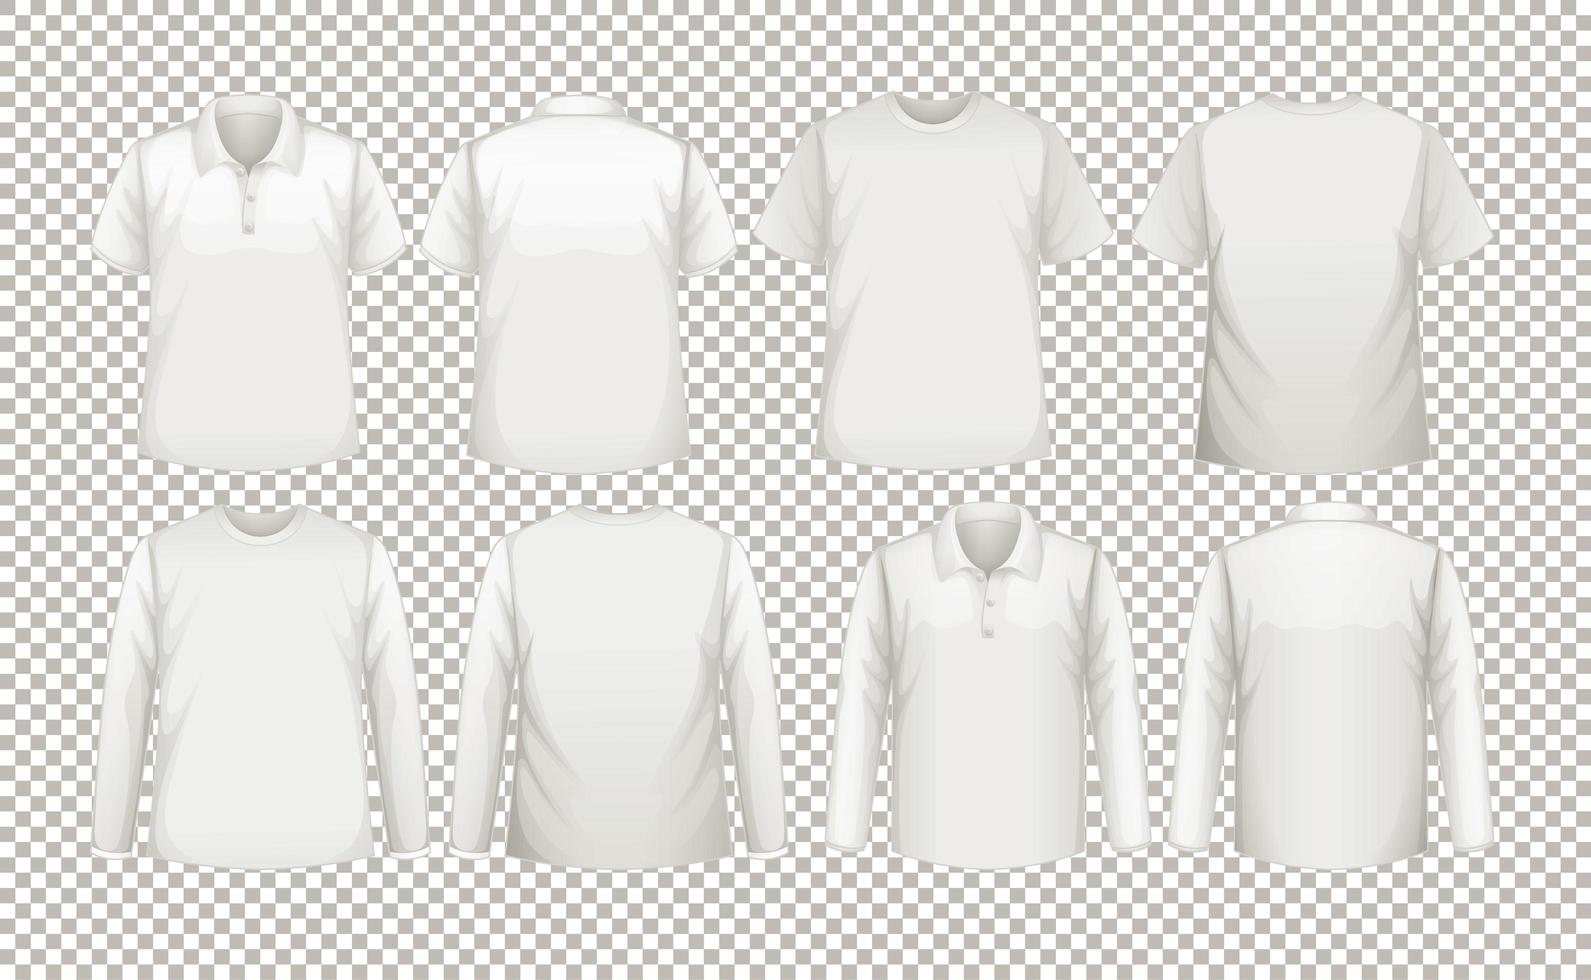 A collection of different types of white shirts vector